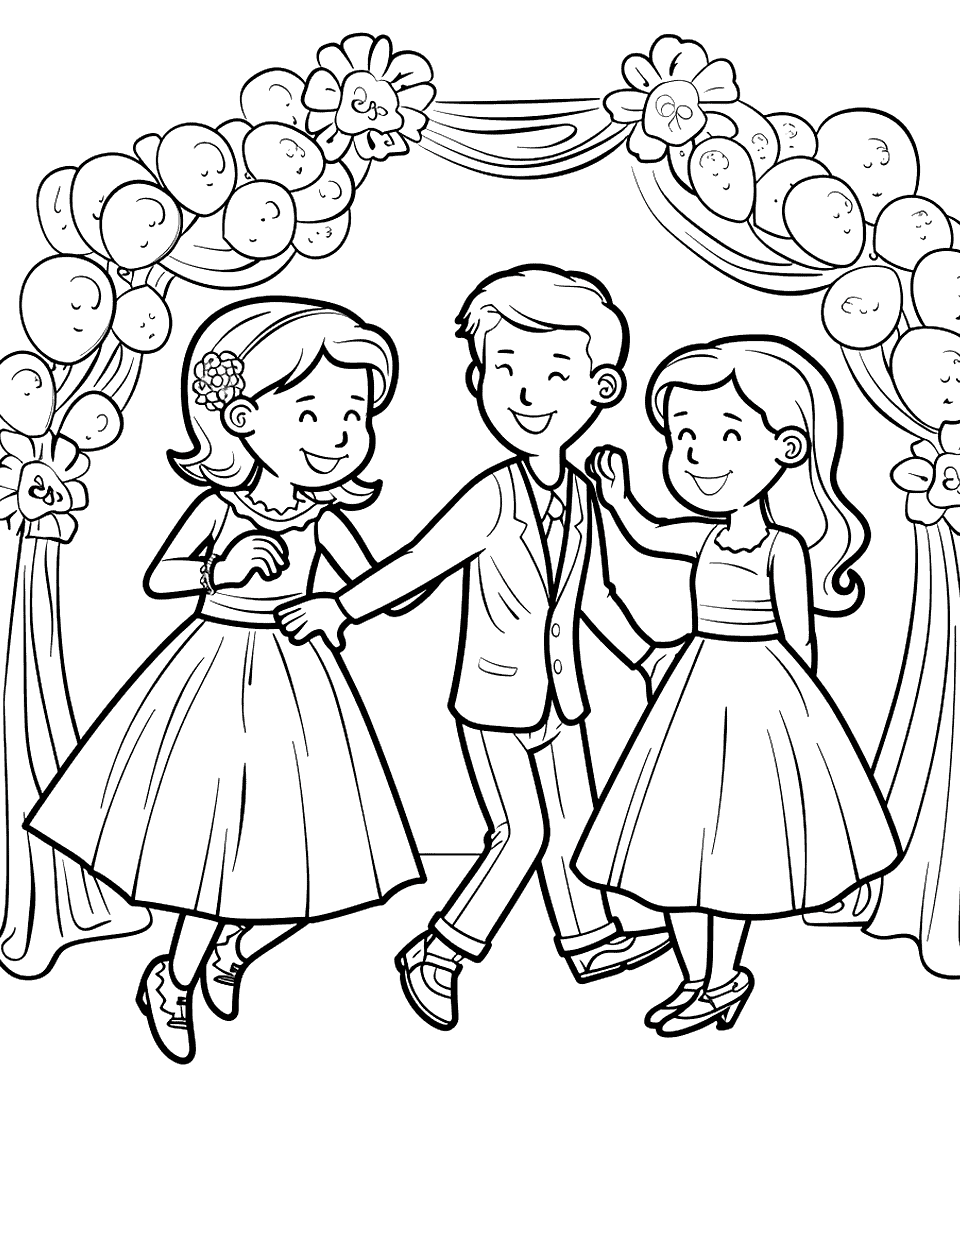 Kids Dancing at the Reception Wedding Coloring Page - Children dancing happily at the wedding reception.